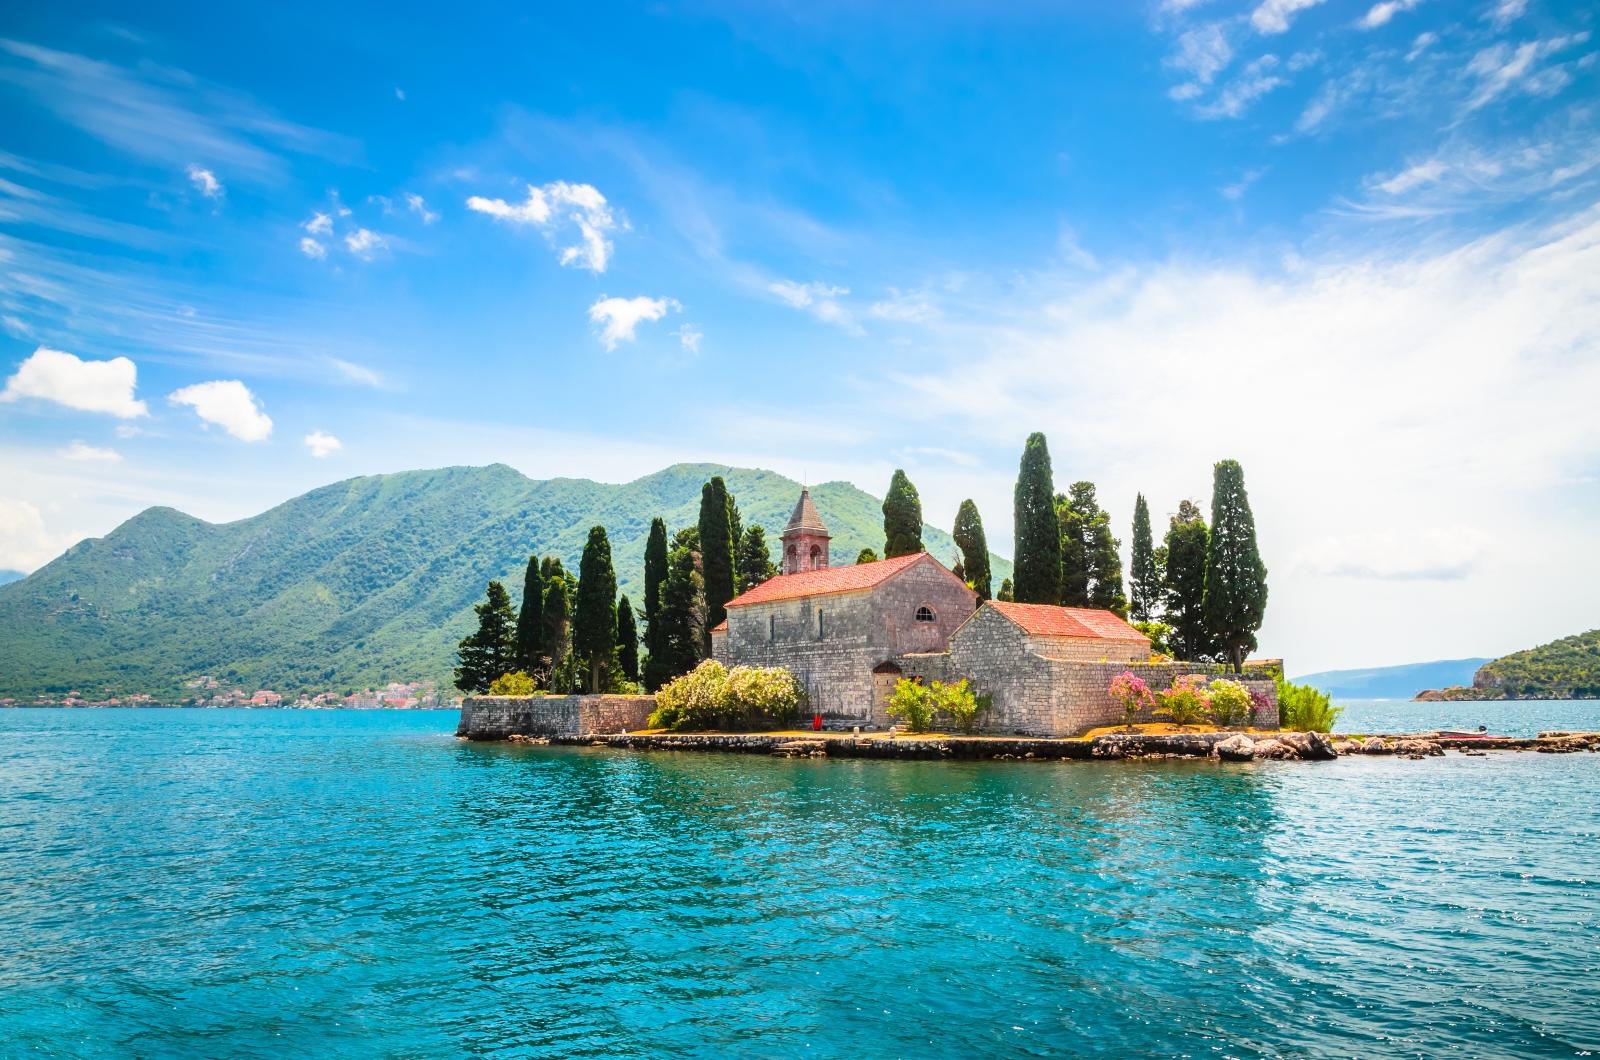 St George Island off Kotor, Montenegro, surrounded by lush turquoise waters of the Mediterranean